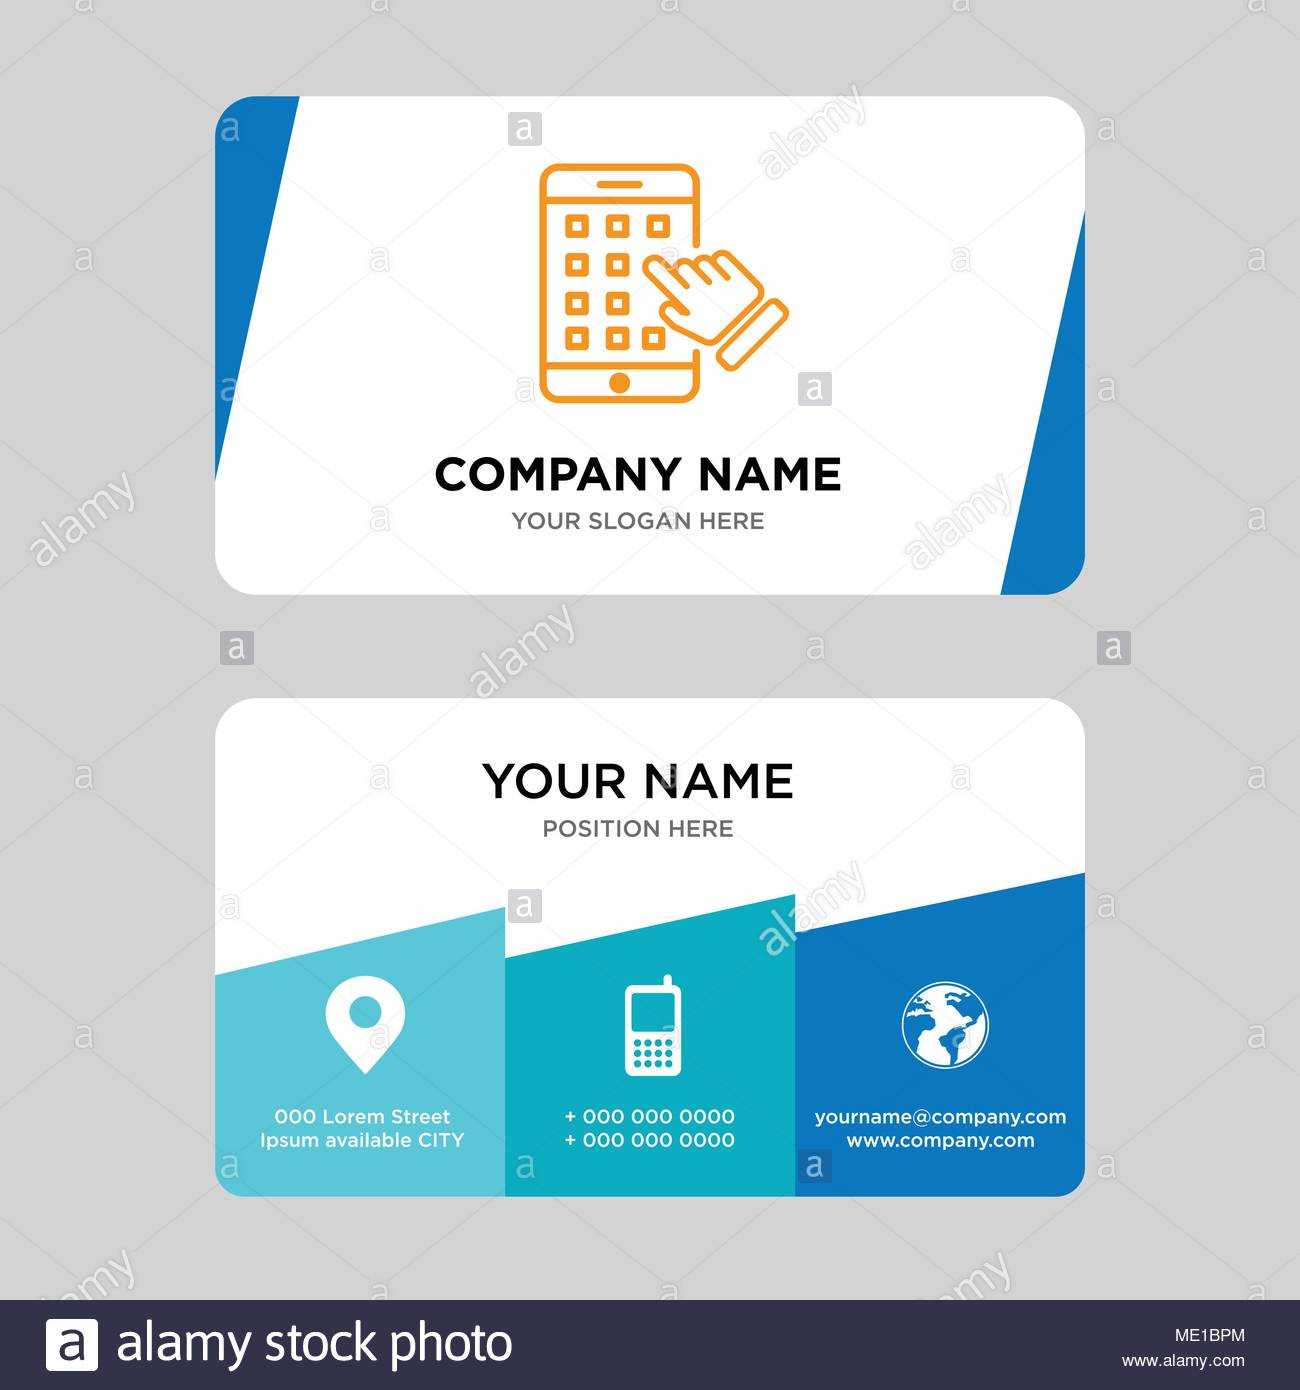 Iphone Business Card Design Template, Visiting For Your With Regard To Iphone Business Card Template